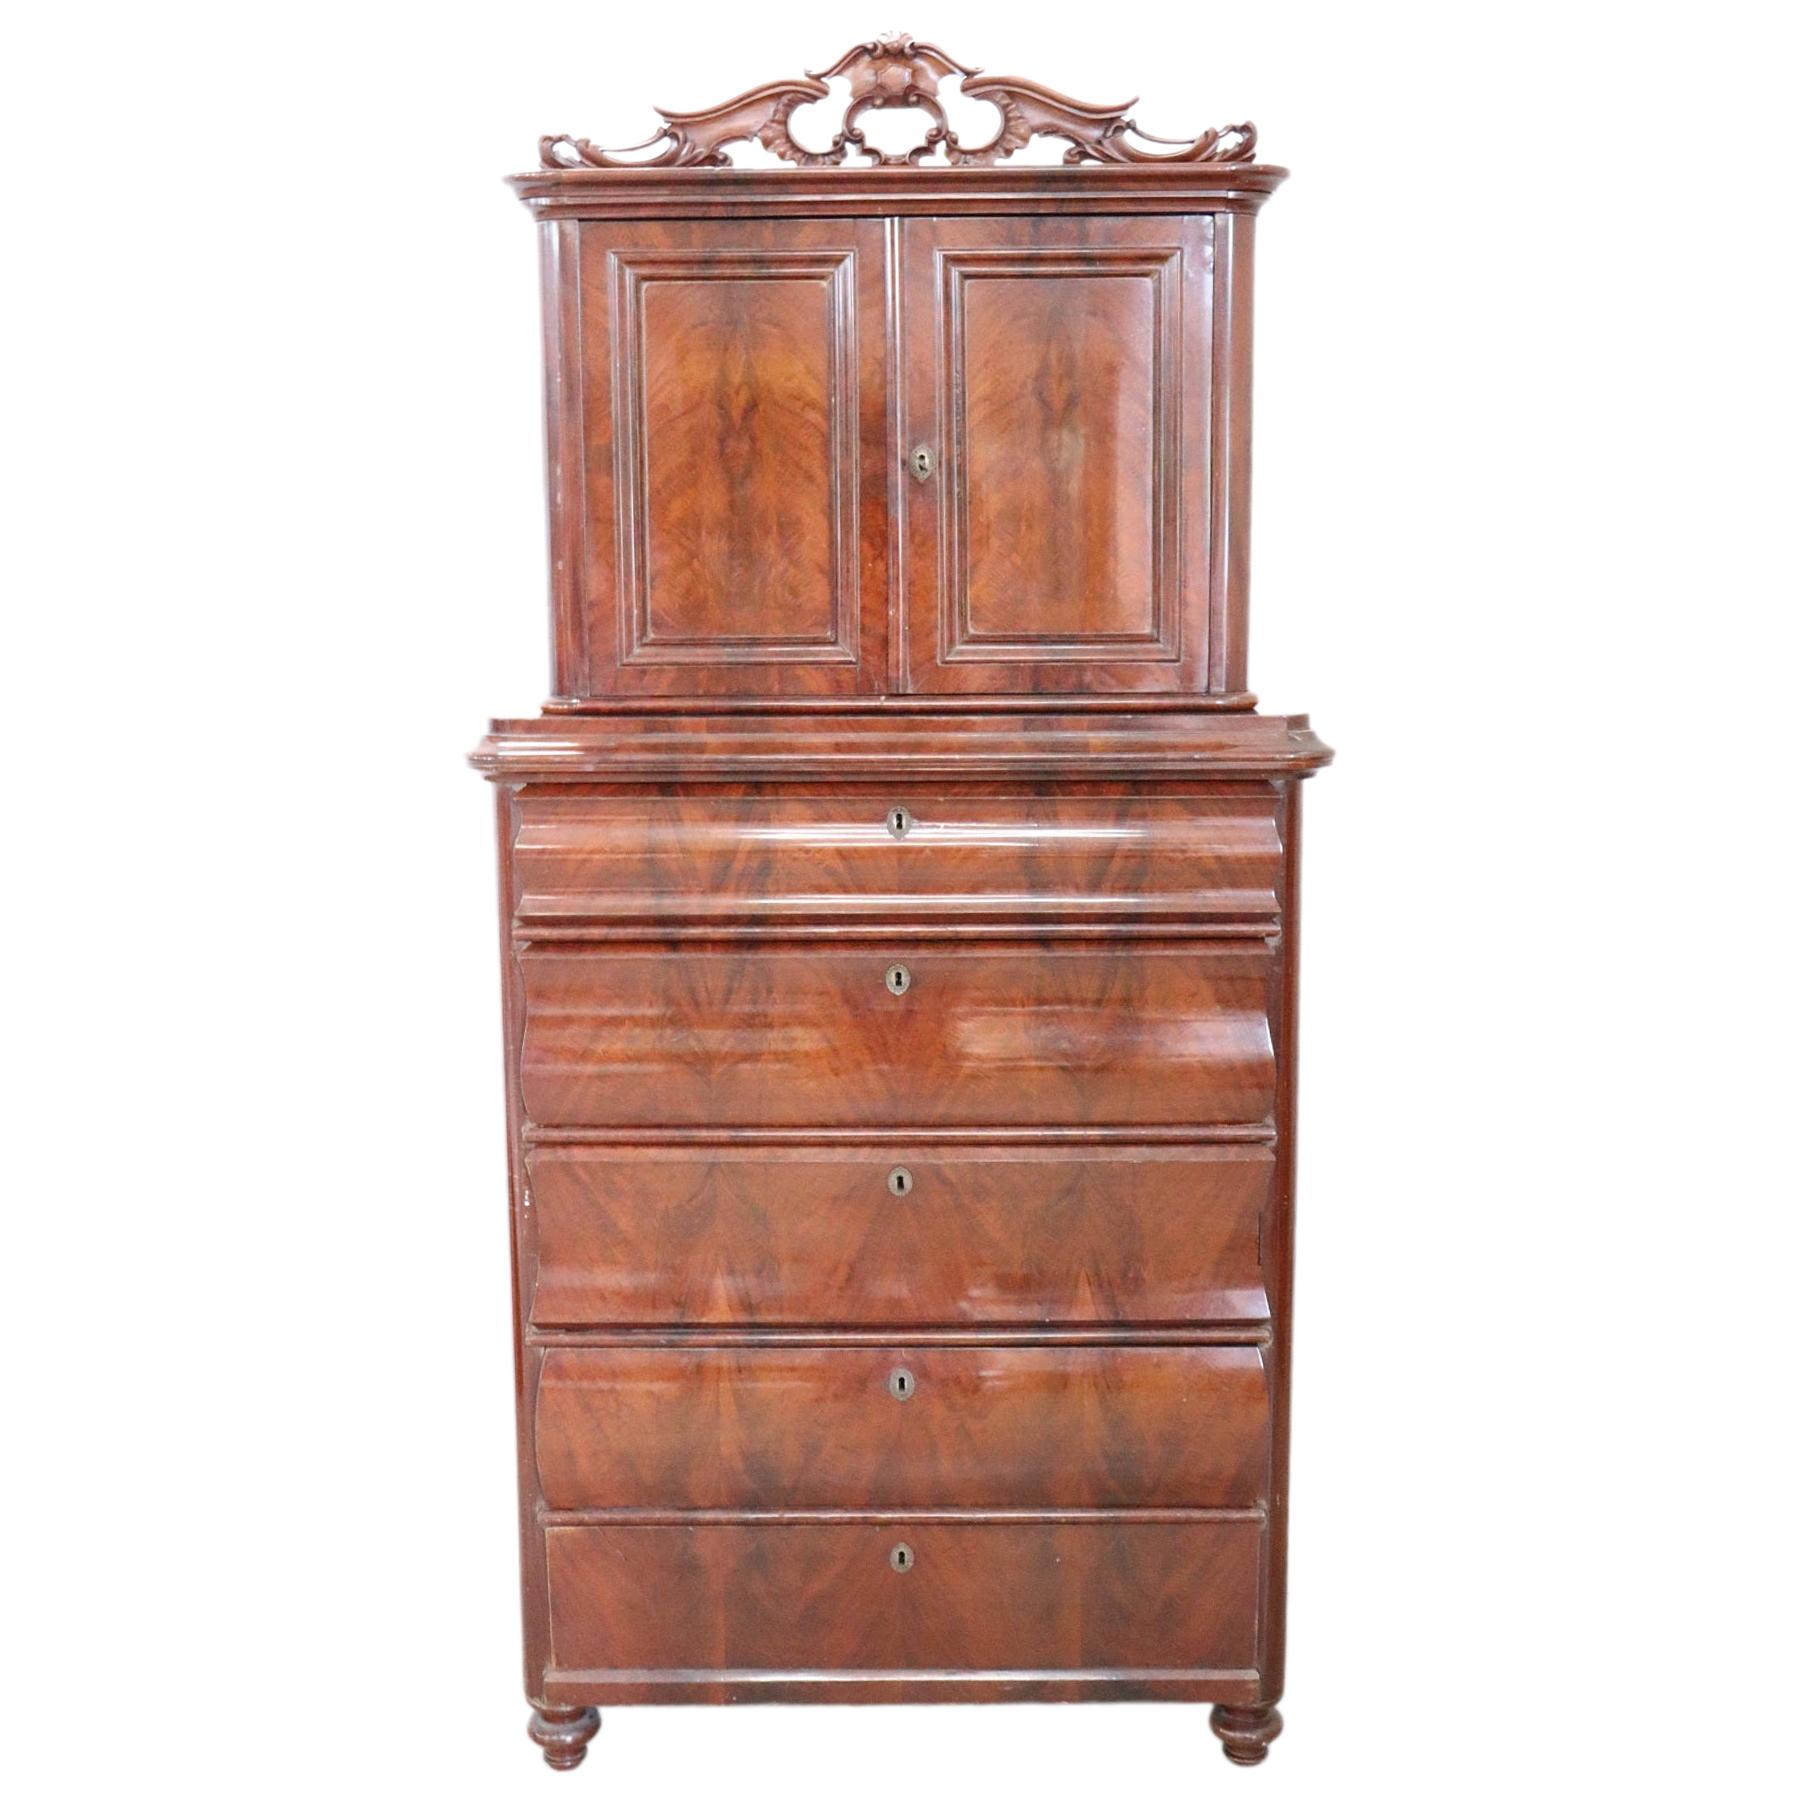 19th Century English Mahogany Commode or Tall Chest of Drawers, 1850s